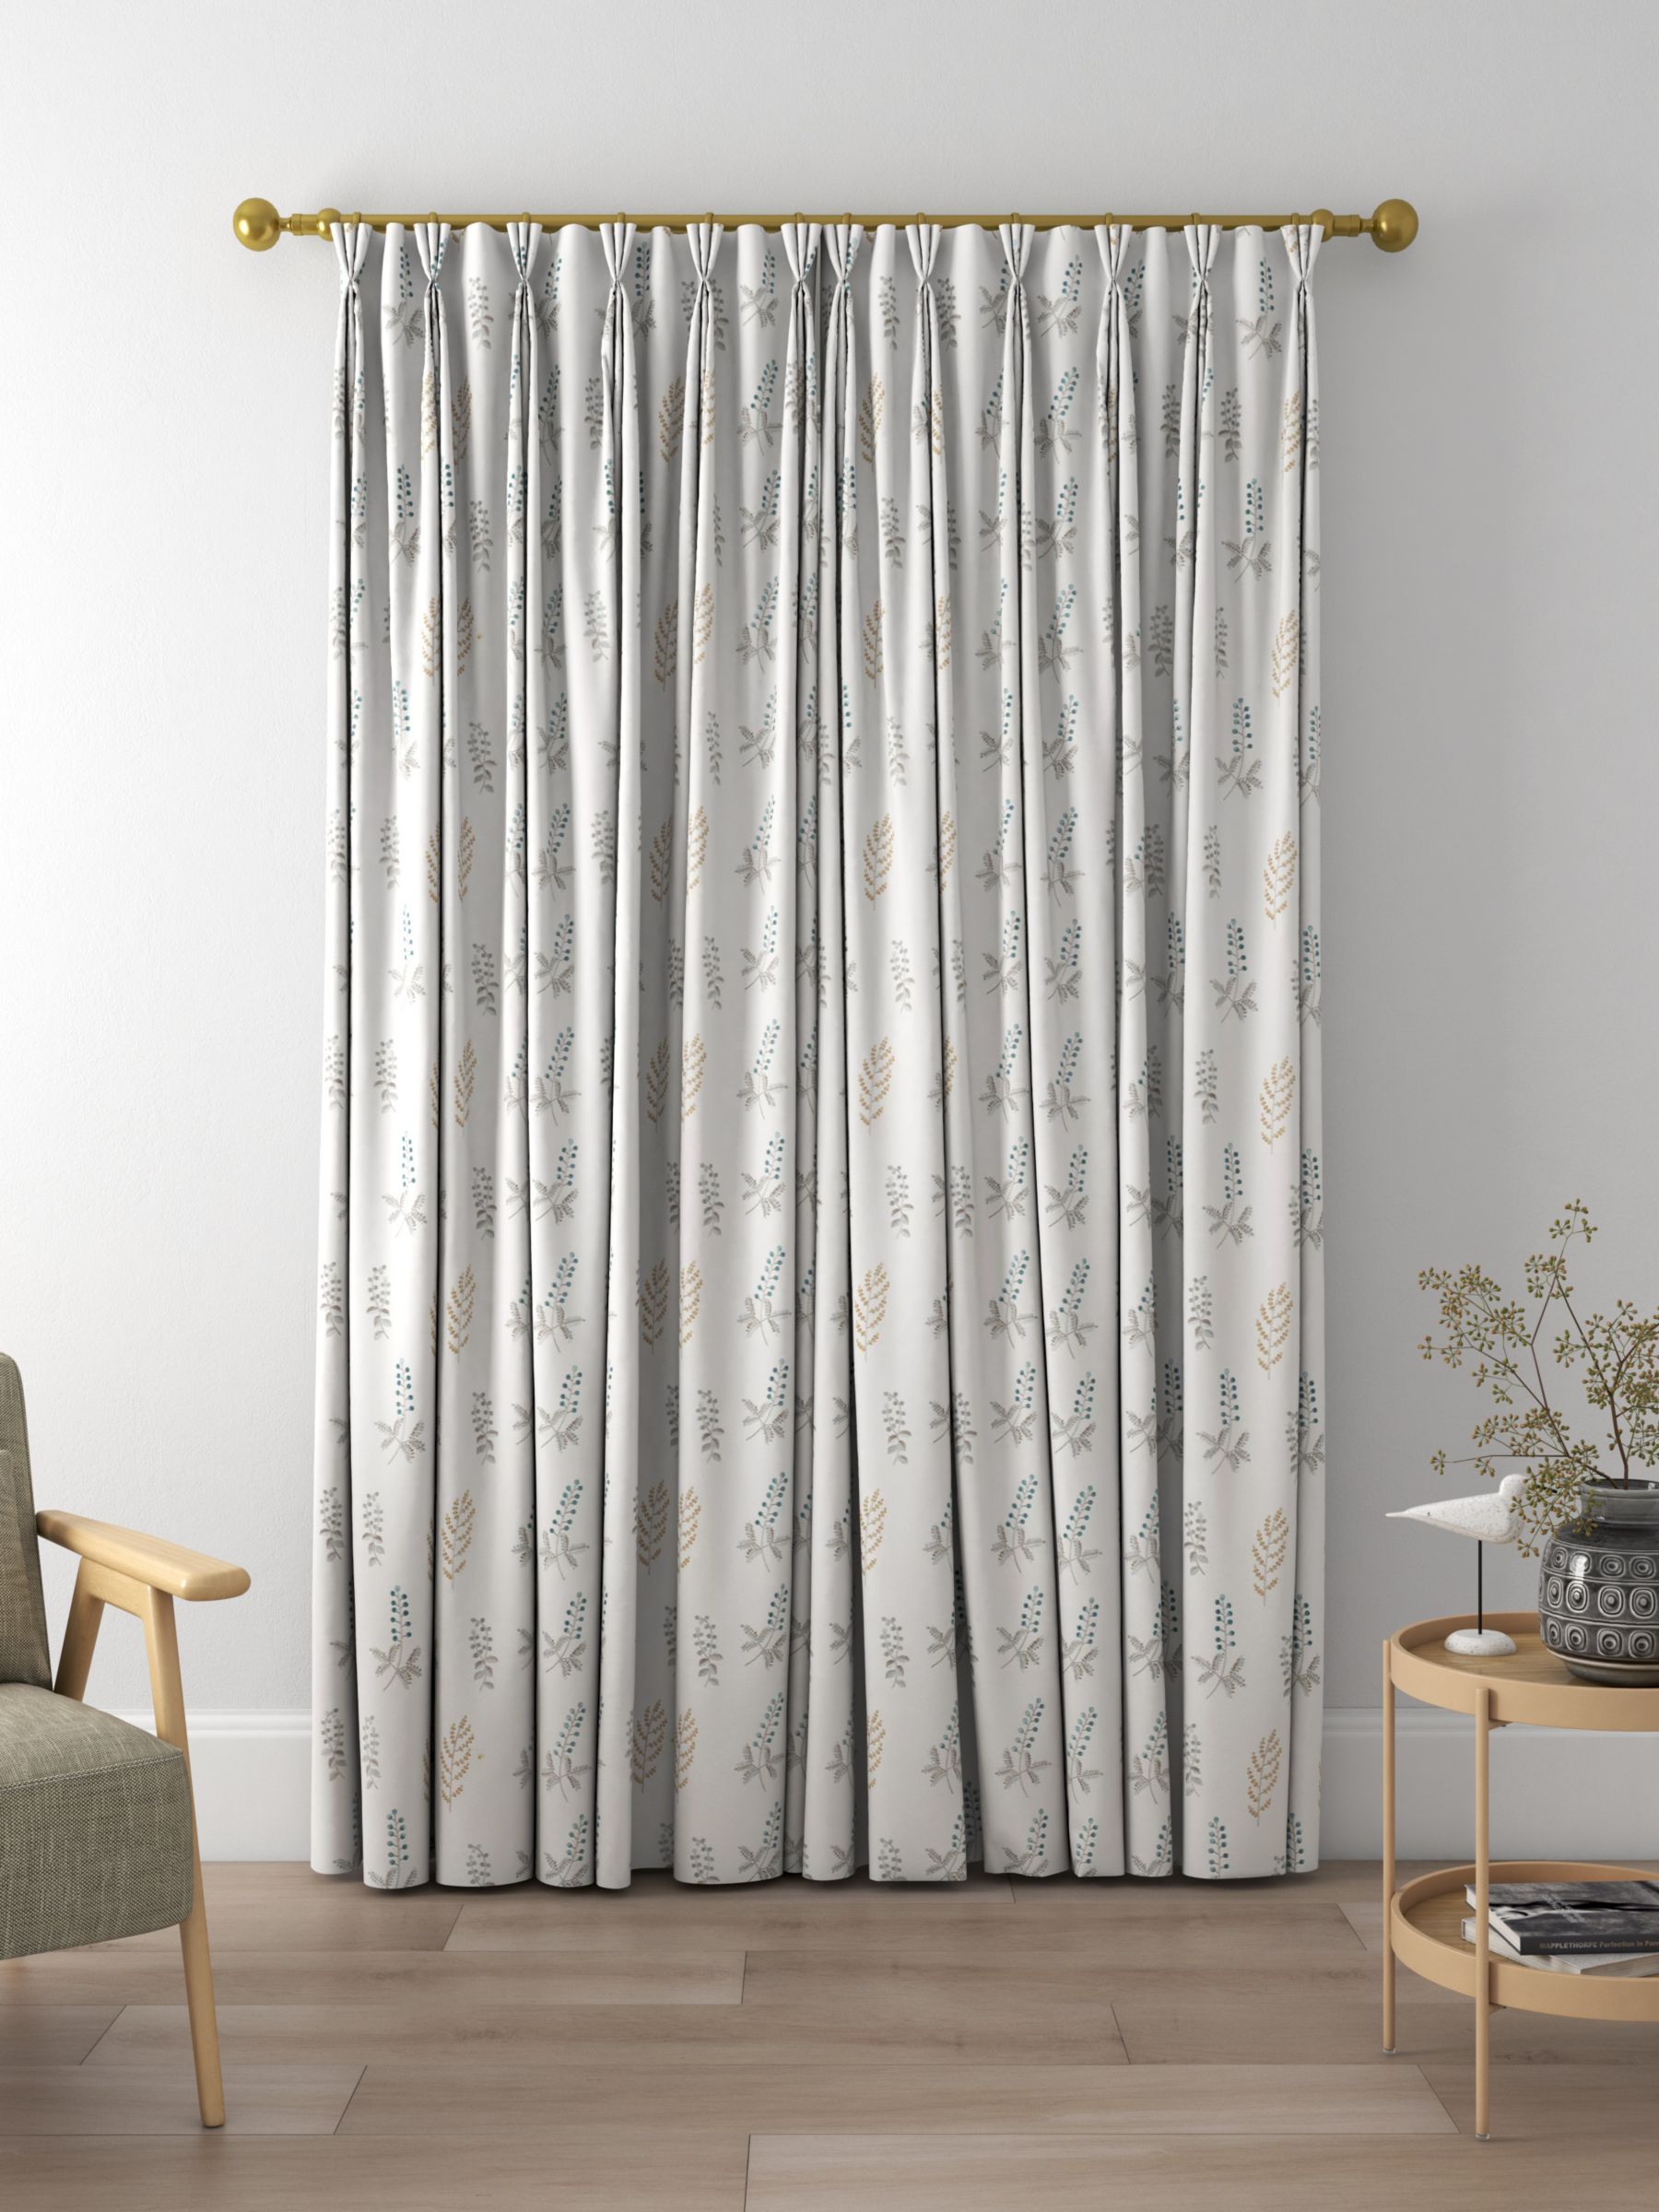 Sanderson Bilberry Made to Measure Curtains, Dijon/Teal